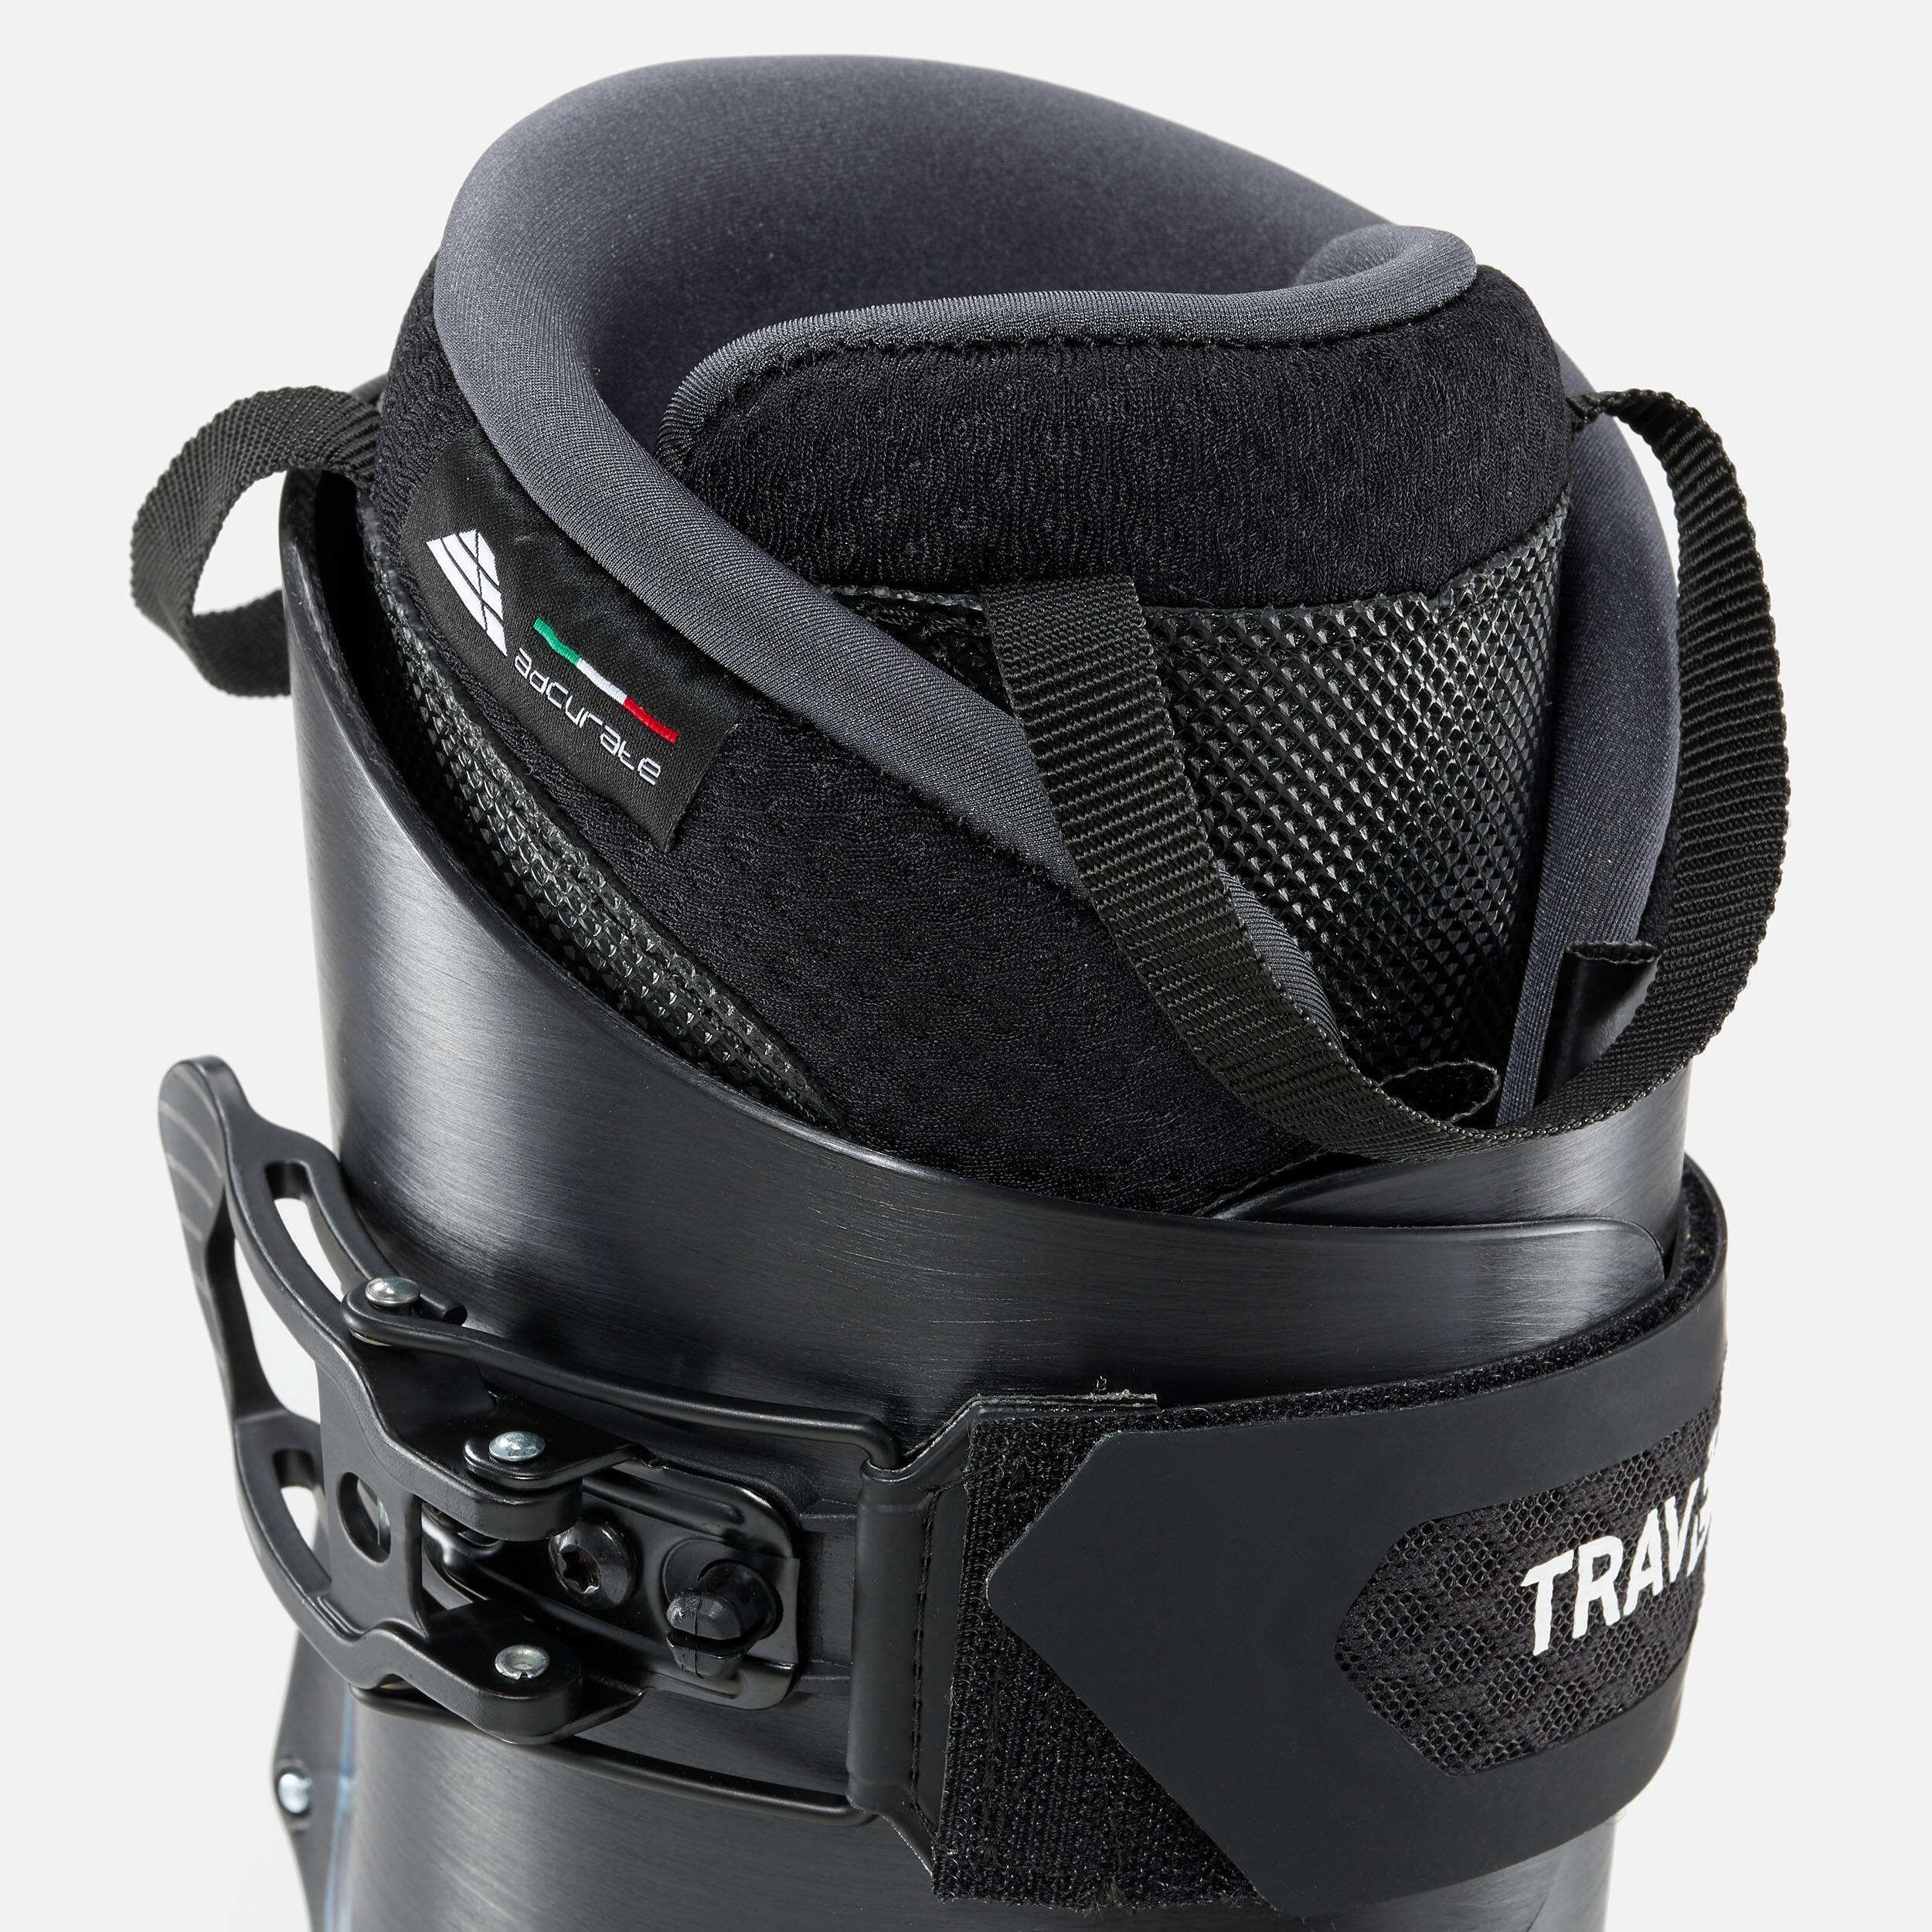 ADULT SKI TOURING BOOTS - FISCHER TRAVERS TS 5/10